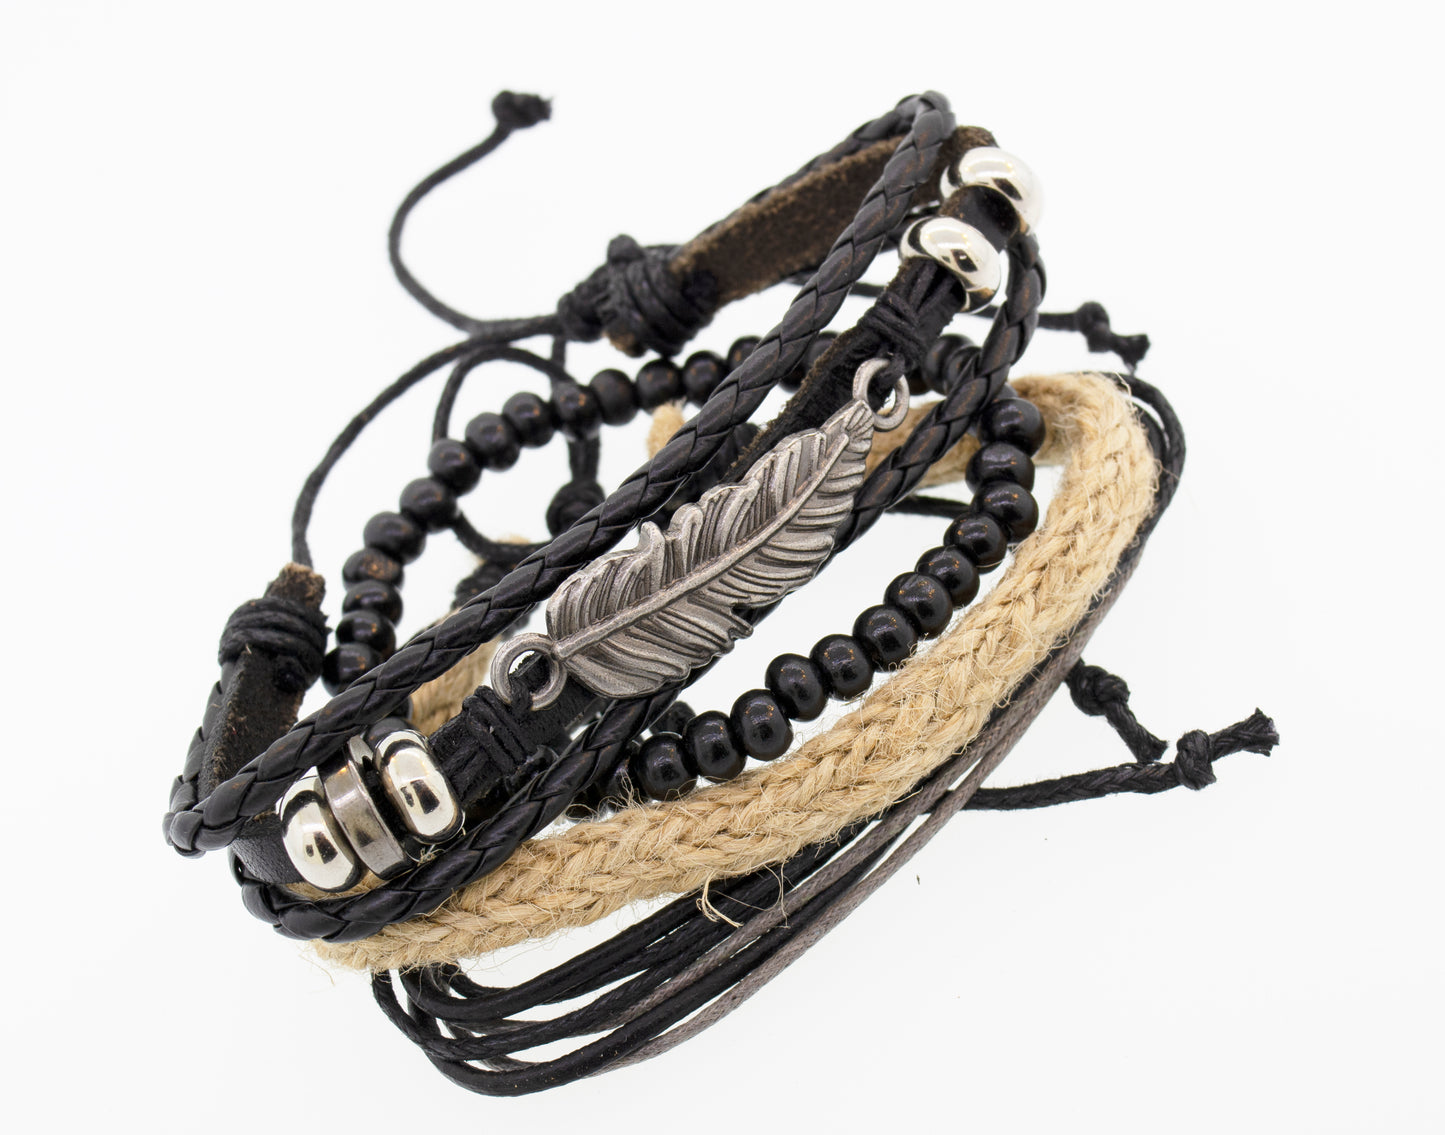 An adjustable Super Silver black leather Multi Bracelet Set adorned with a feather and beads.